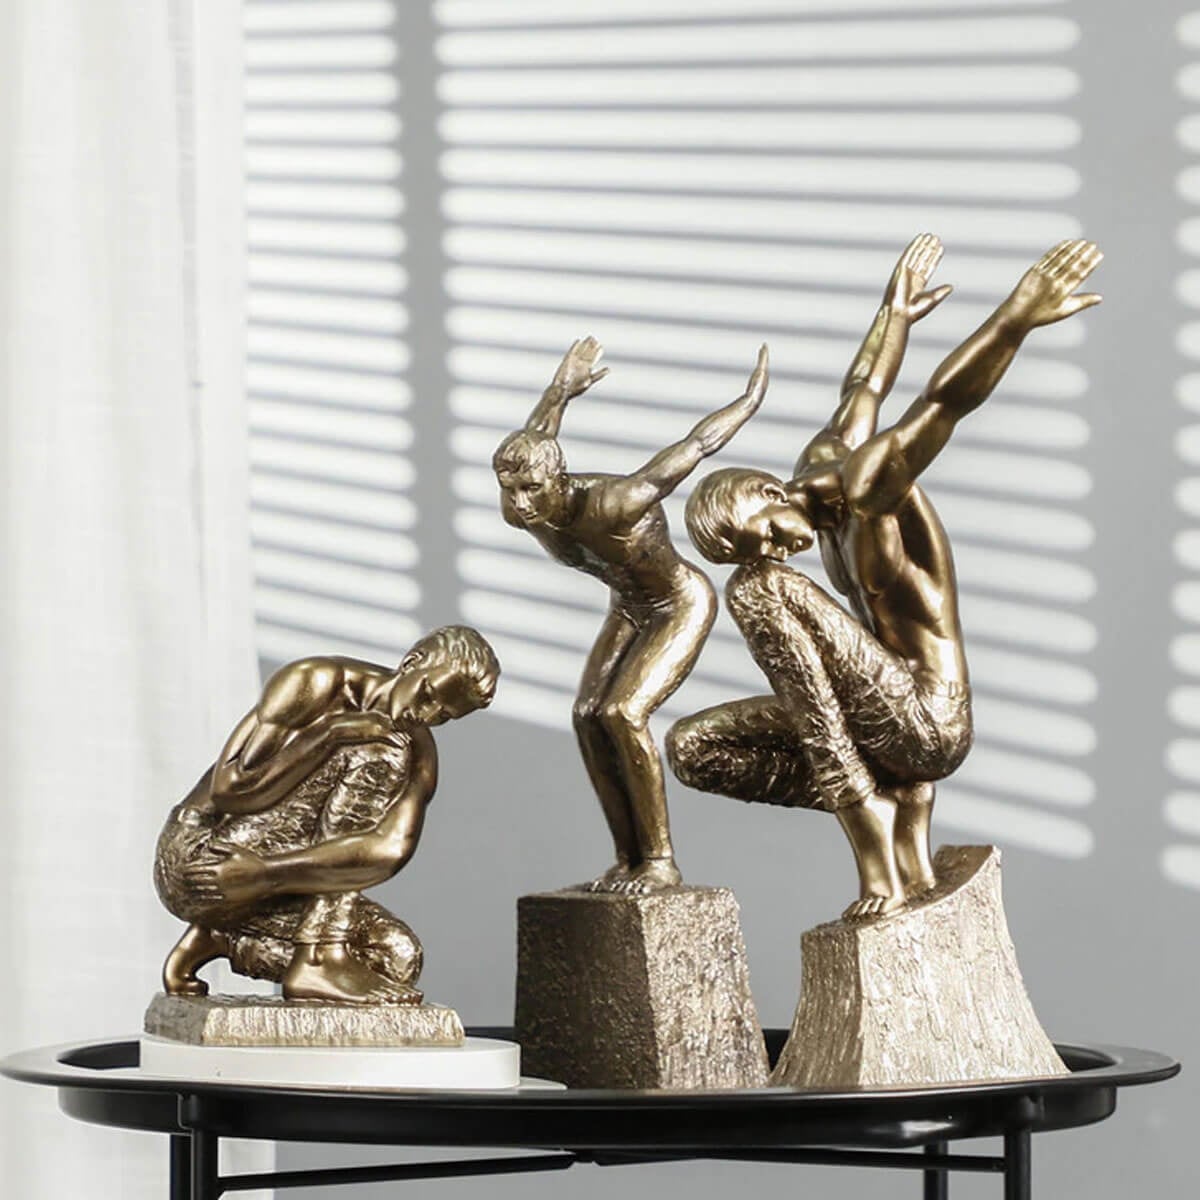 The Nordic Art Characters Creative Movement Series Sculptures